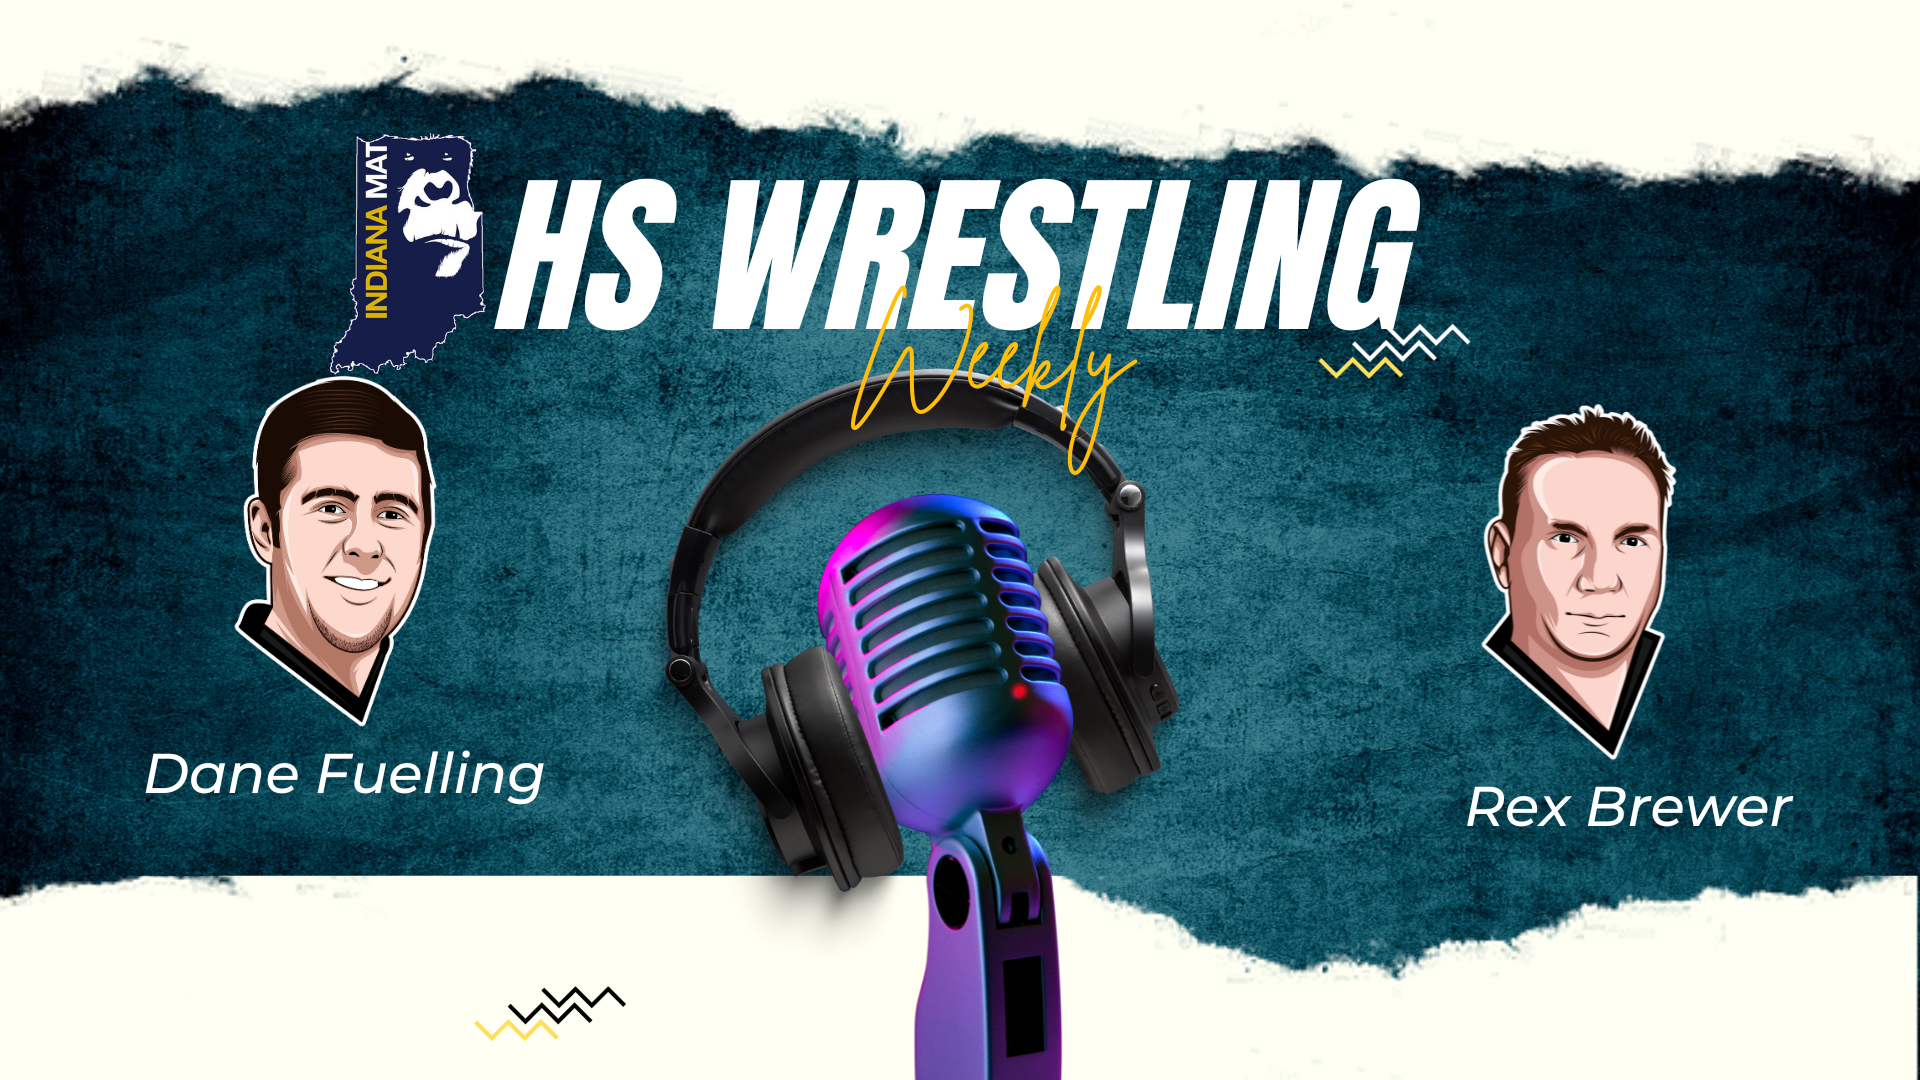 More information about "HS Wrestling Weekly Season 5 Episode 13"